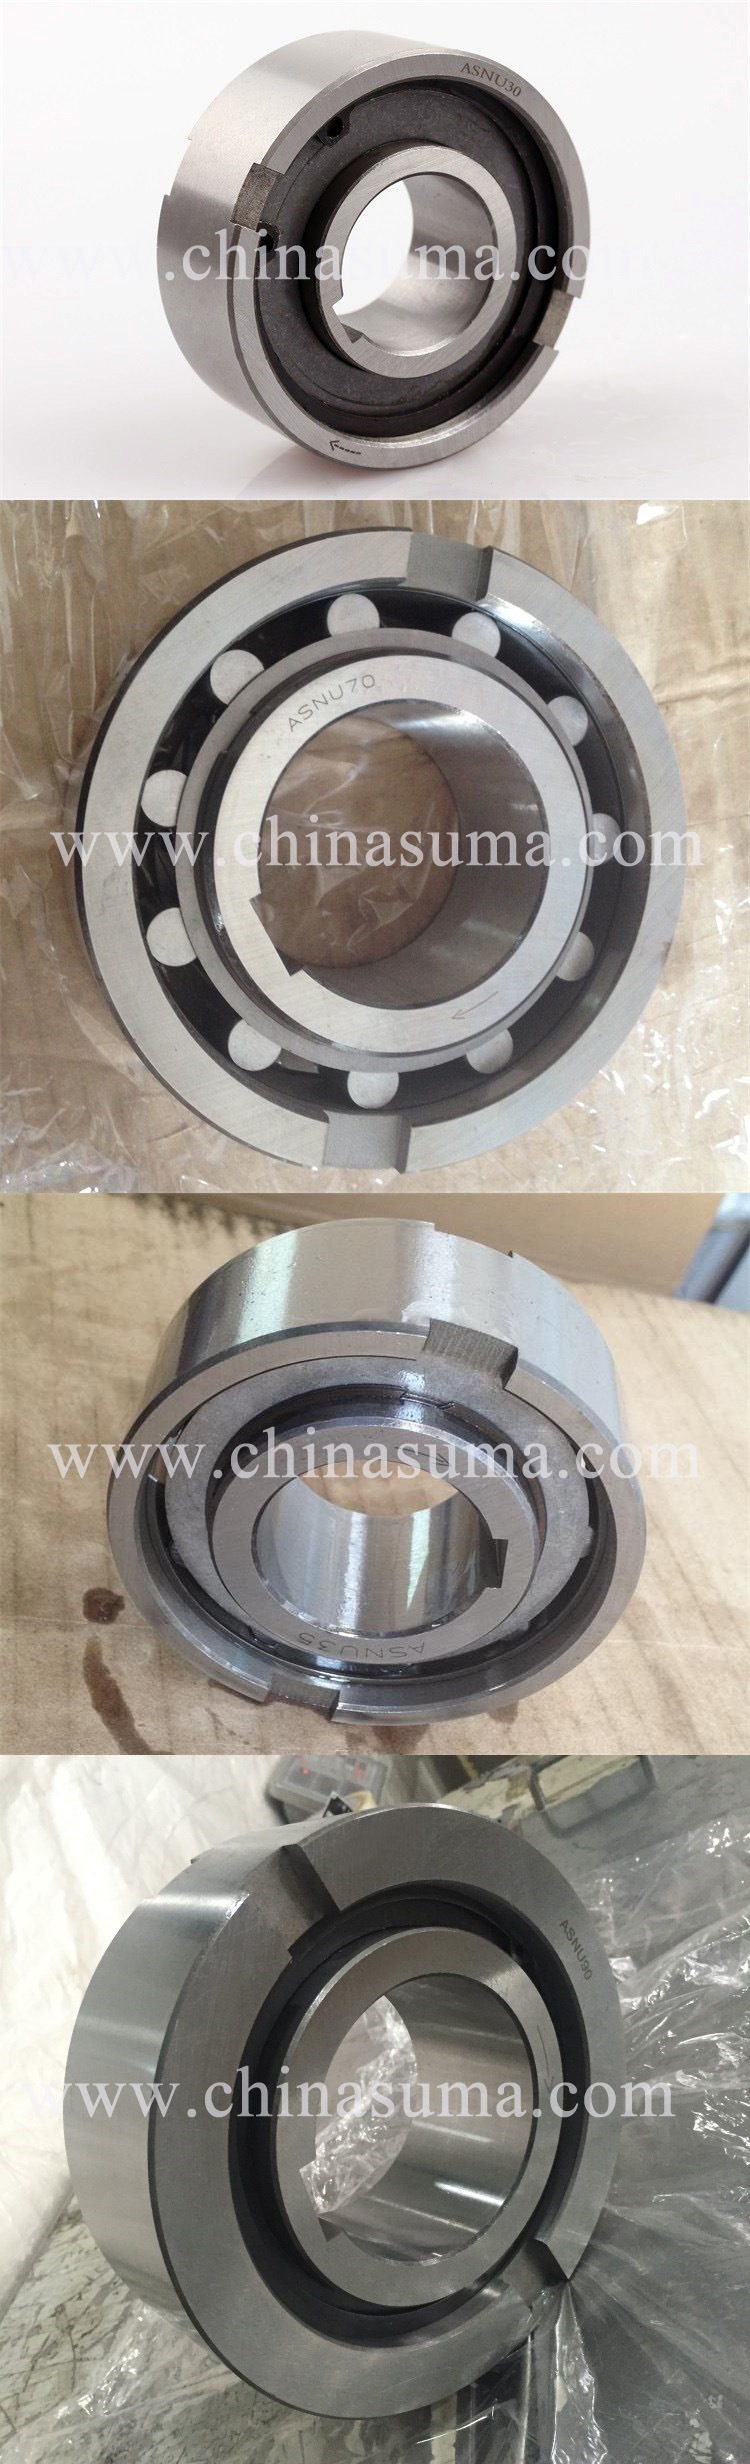 TFS25 Roller Bearing One Way Clutch for Printing Machine